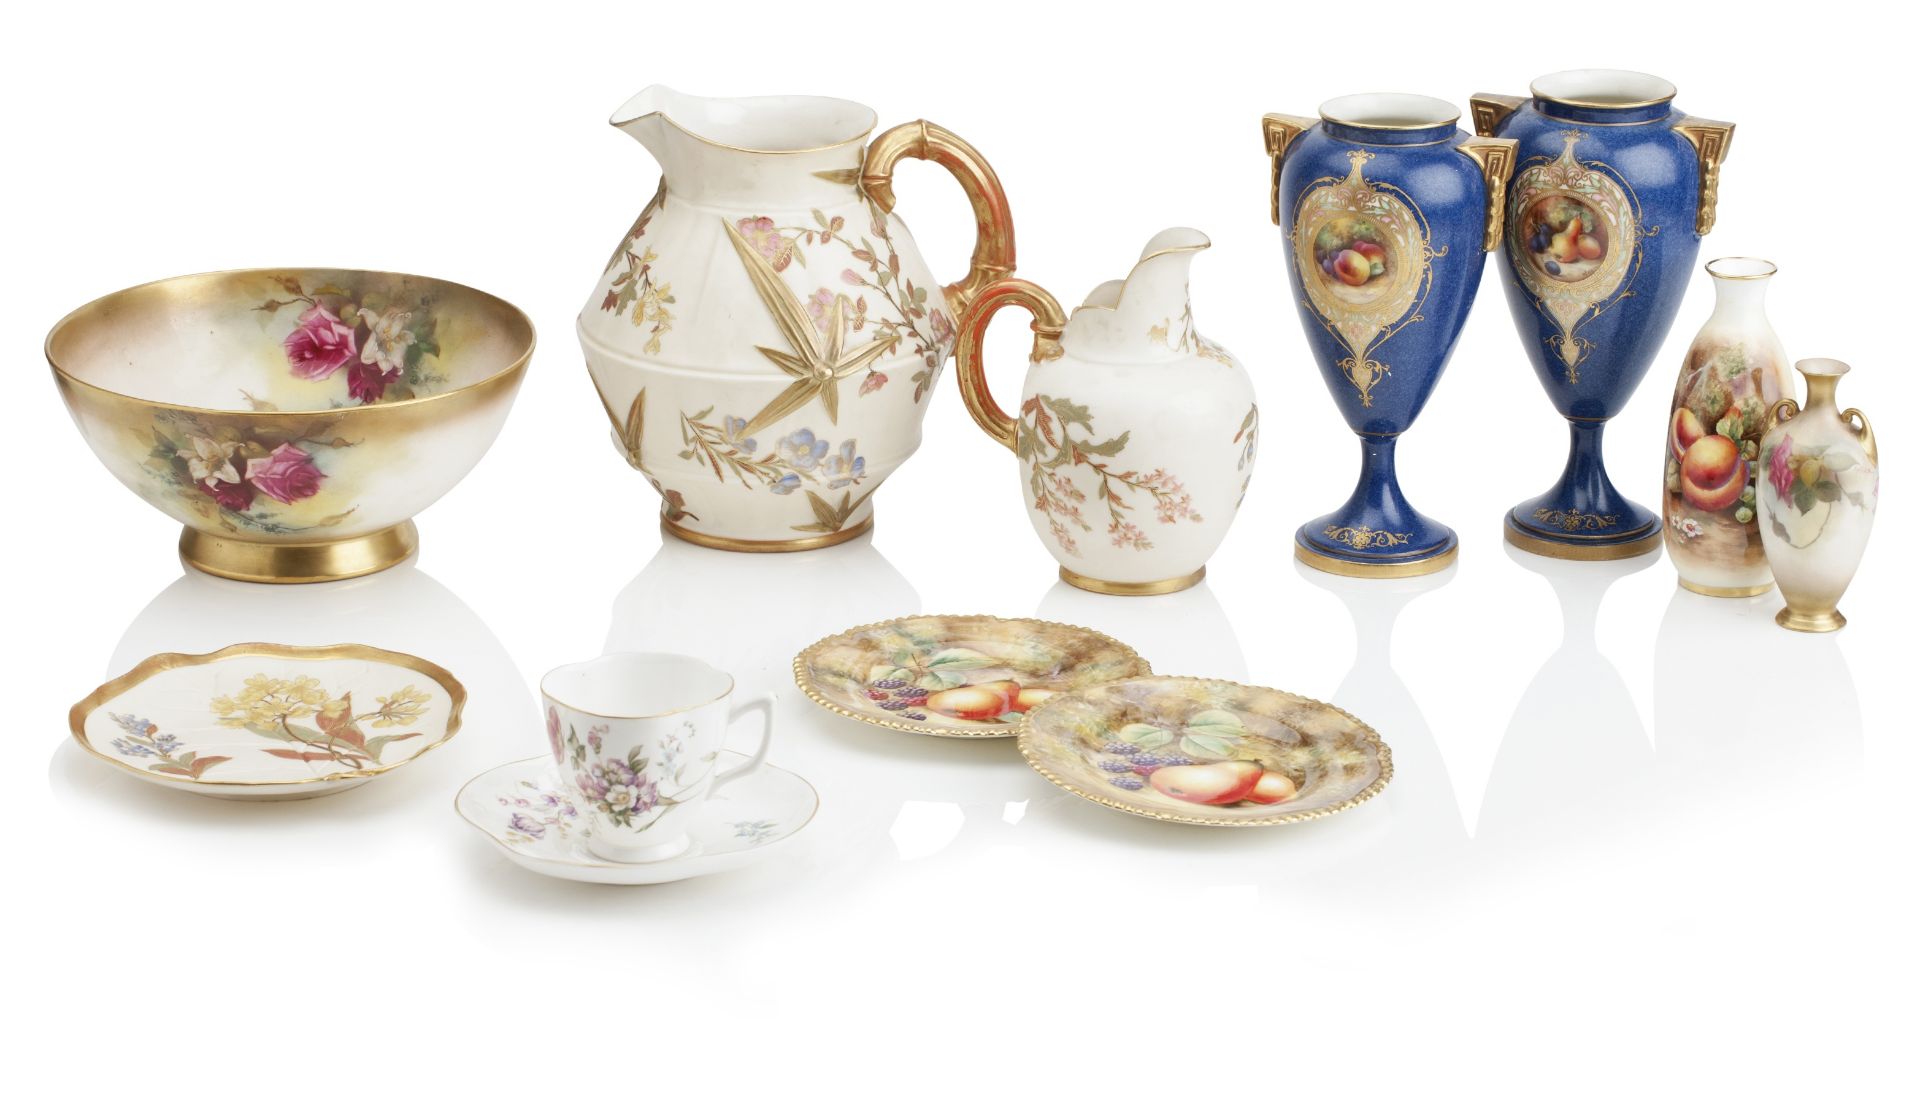 A COLLECTION OF ROYAL WORCESTER PORCELAIN